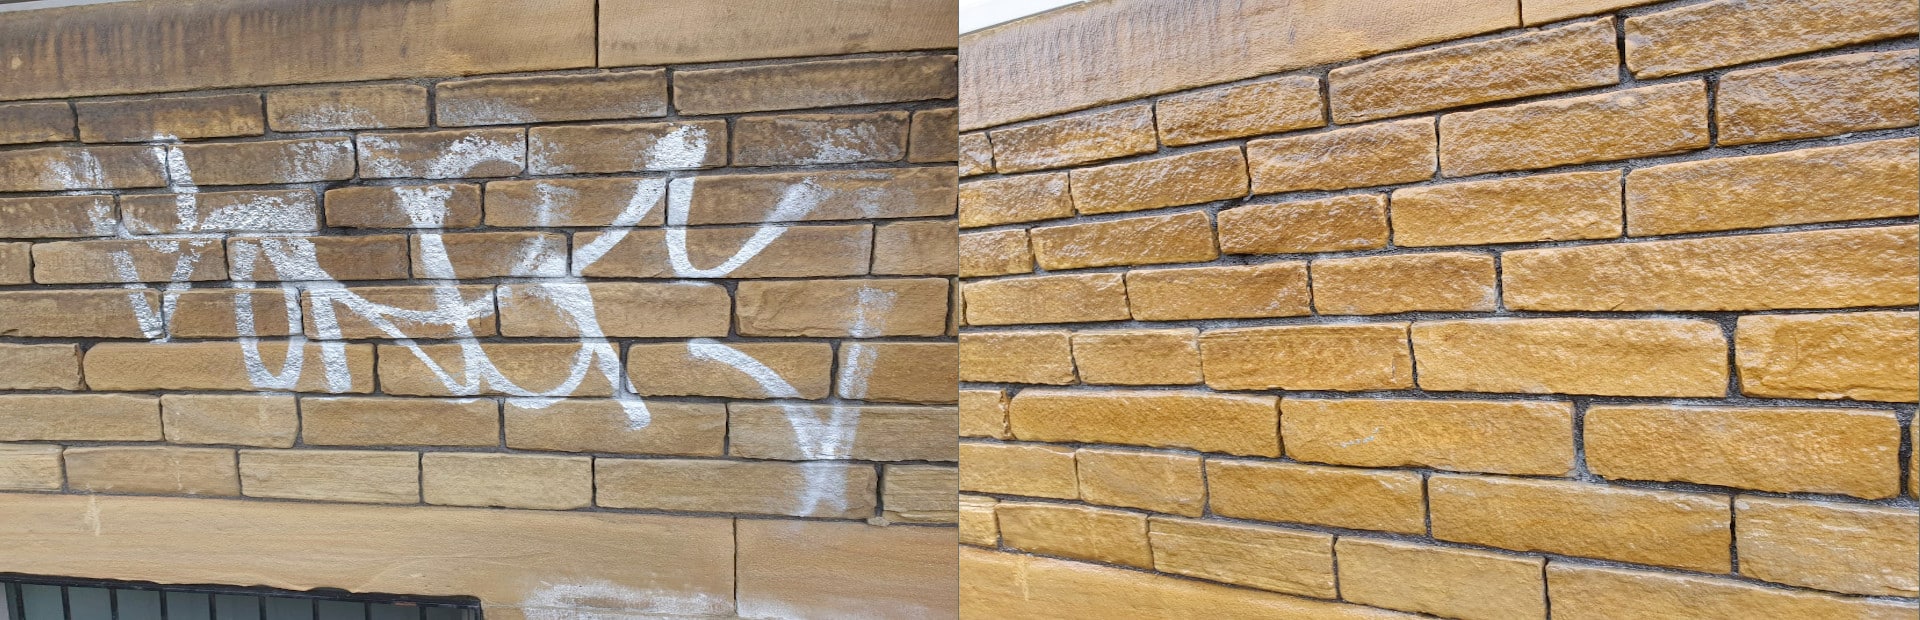 graffiti removal leeds before and after